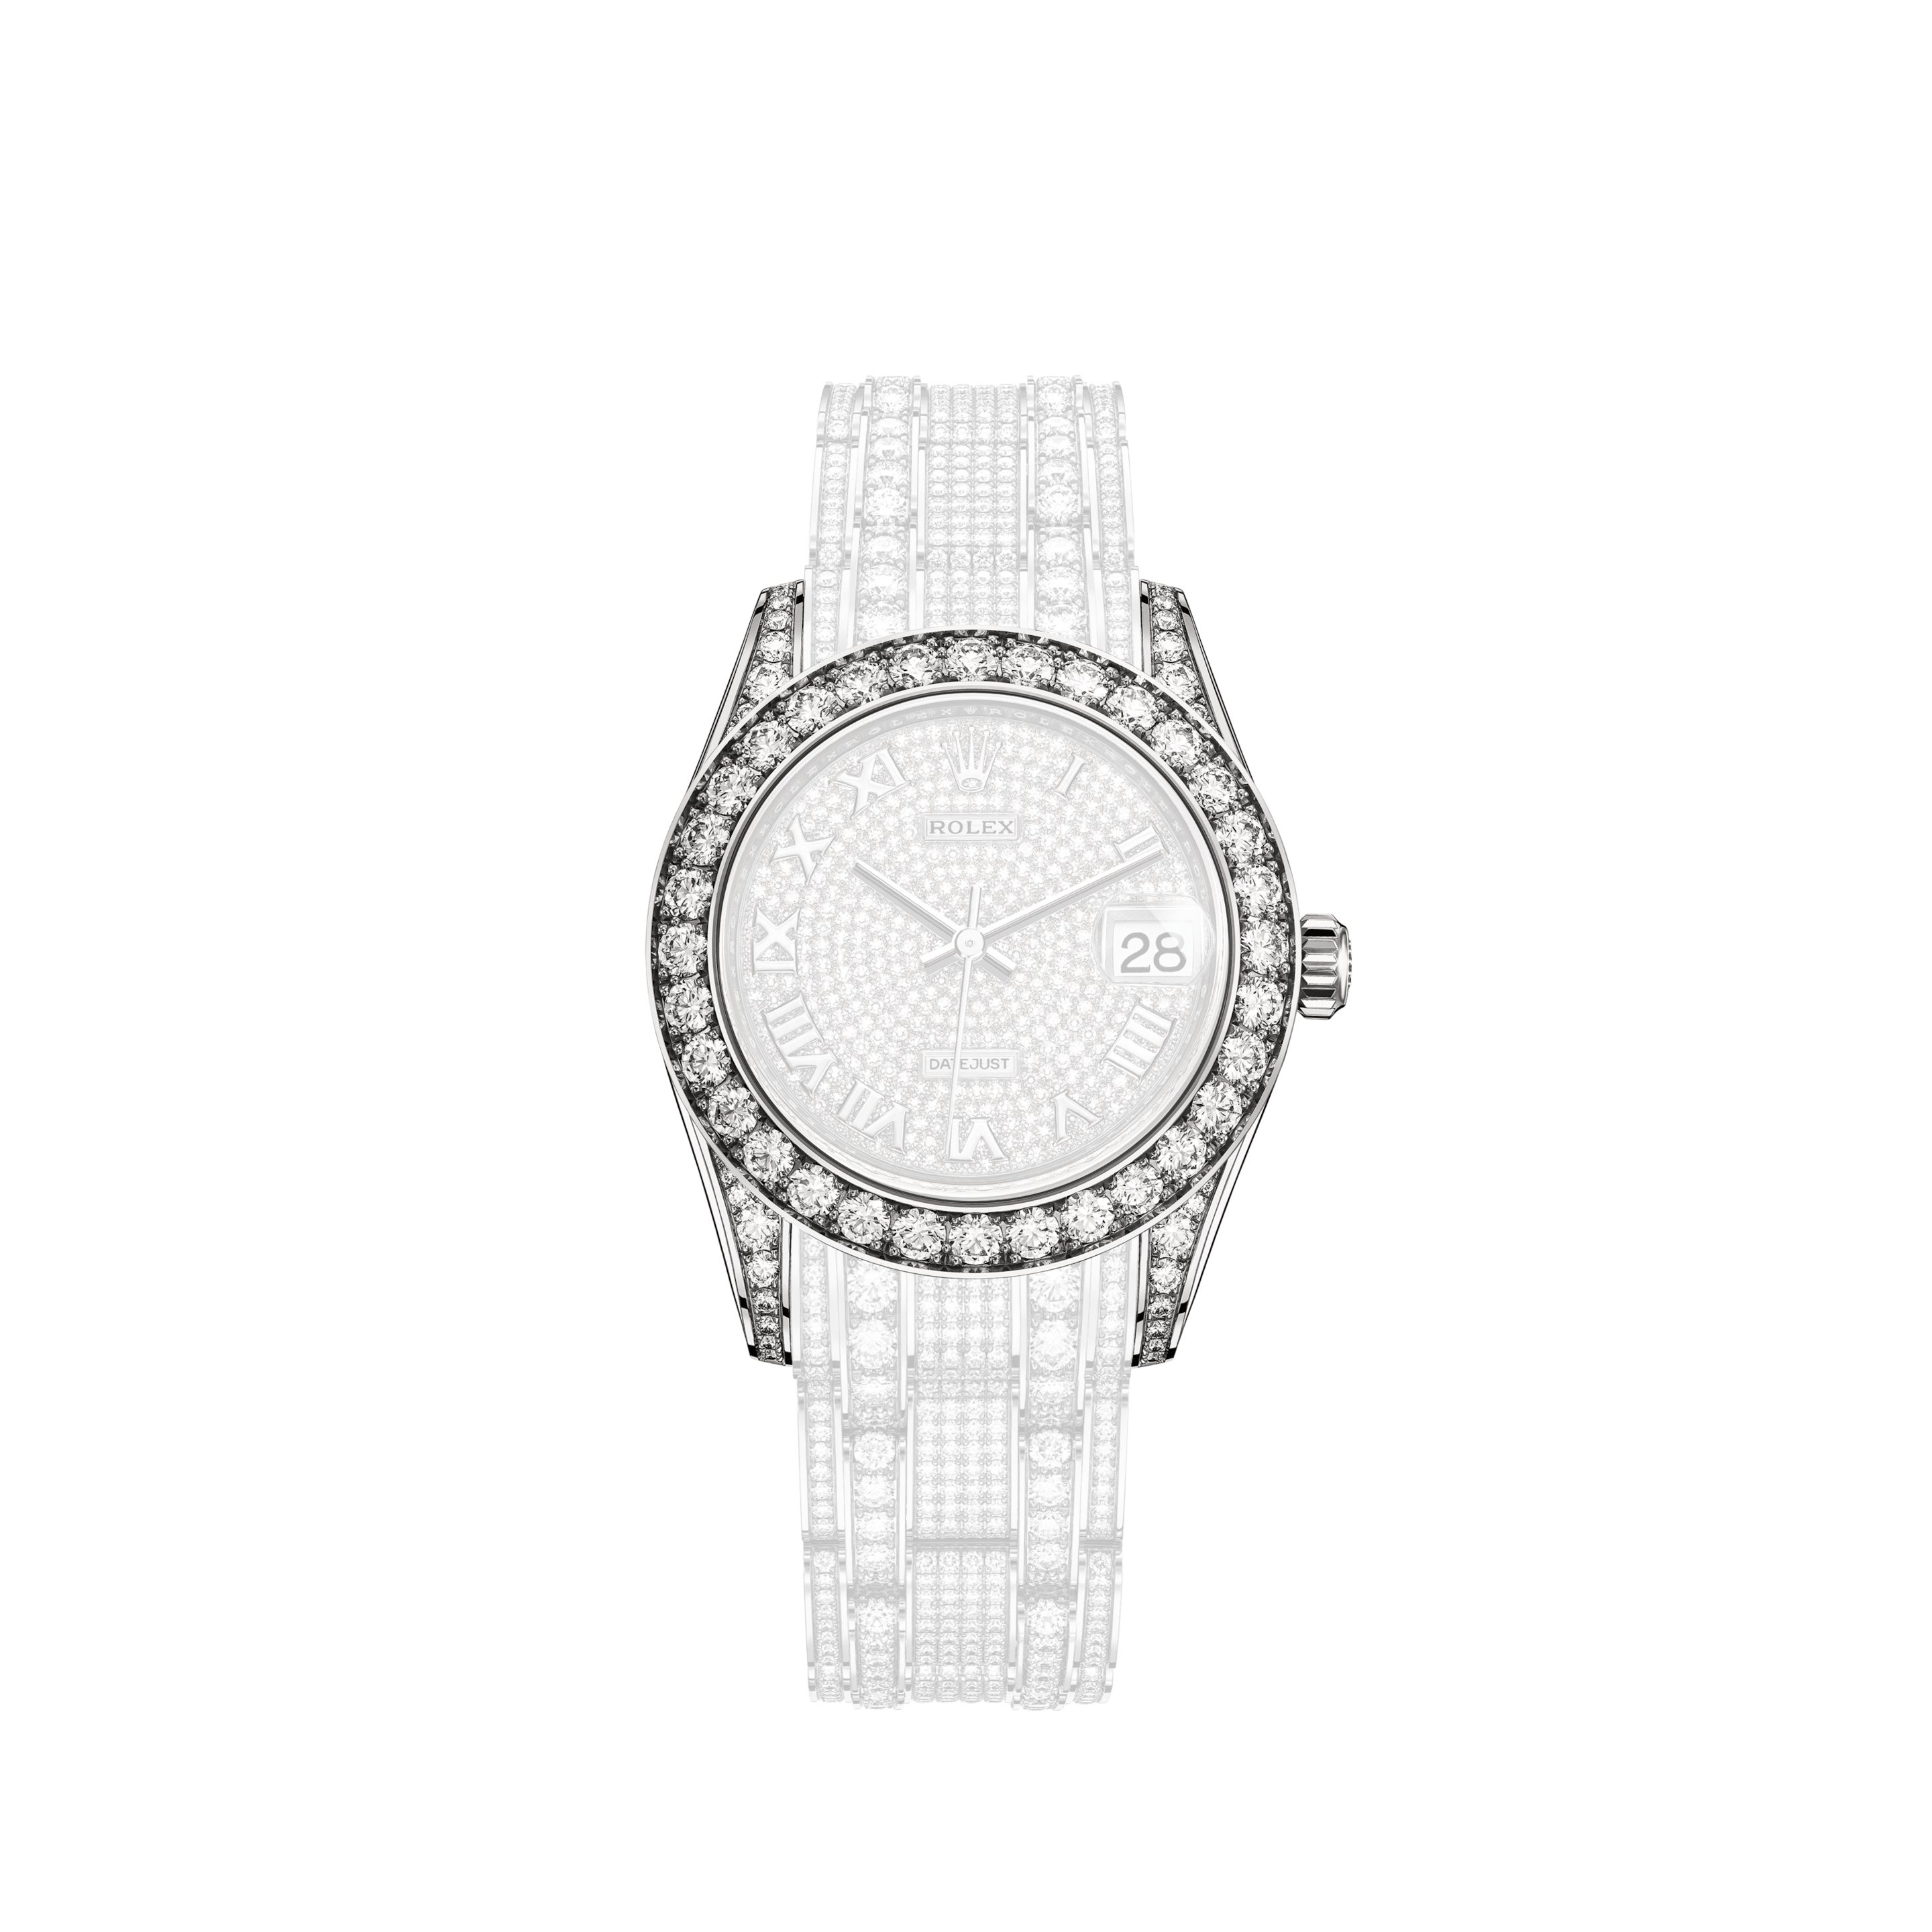 Rolex Datejust 36mm Stainless Steel 126284rbr Jubilee Pink Diamond JubileeRolex Datejust 36mm Stainless Steel 126284rbr Jubilee Pink Diamond Oyster